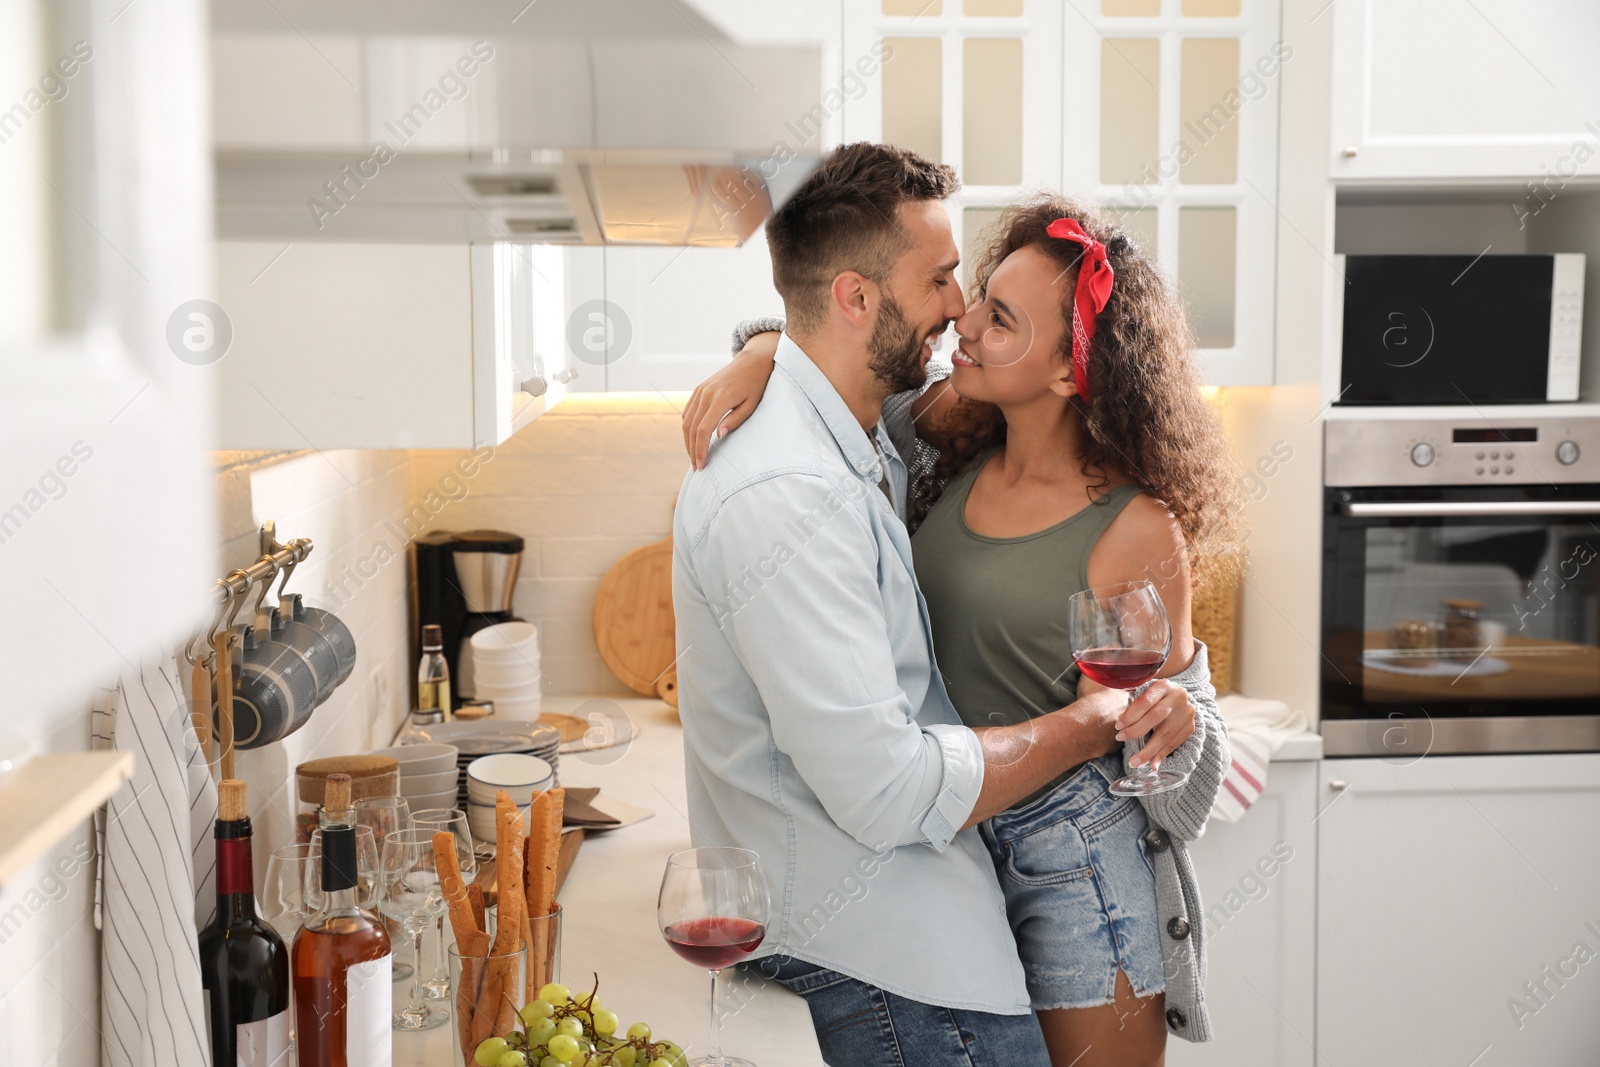 Photo of Lovely couple enjoying time together during romantic dinner in kitchen